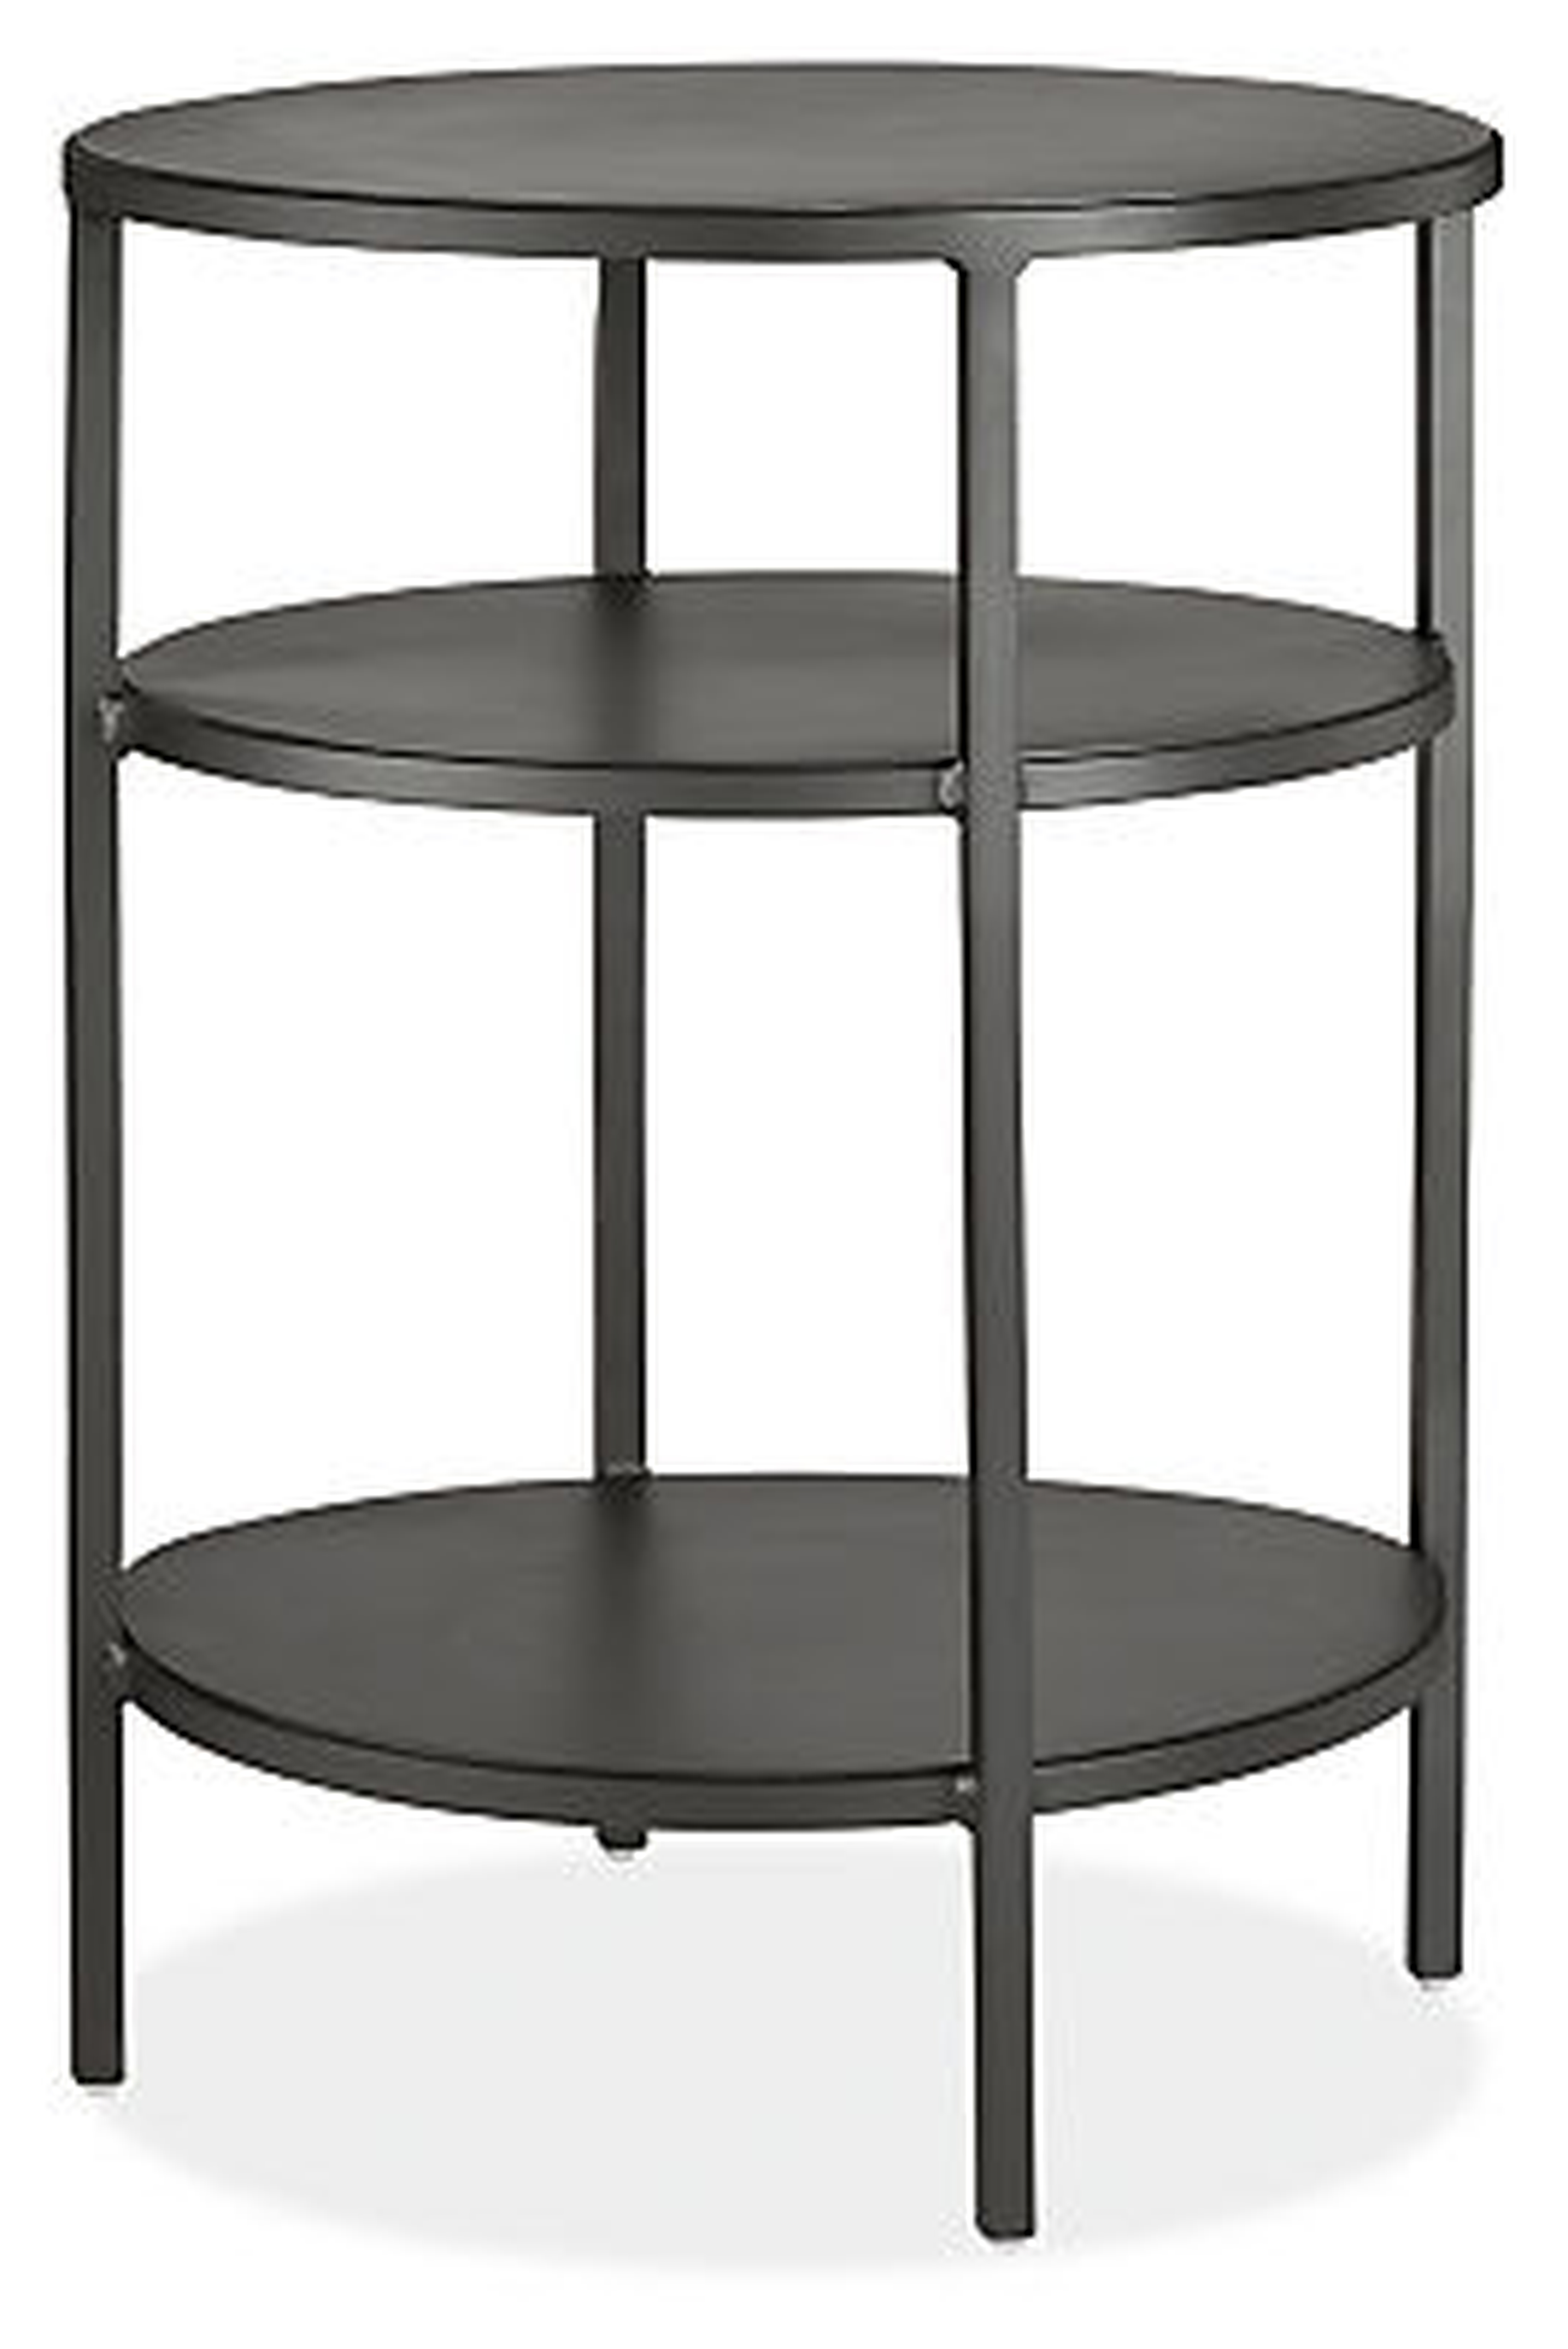 Slim Round End Tables in Natural Steel, 15"D x 20"H, With Shelves - Room & Board